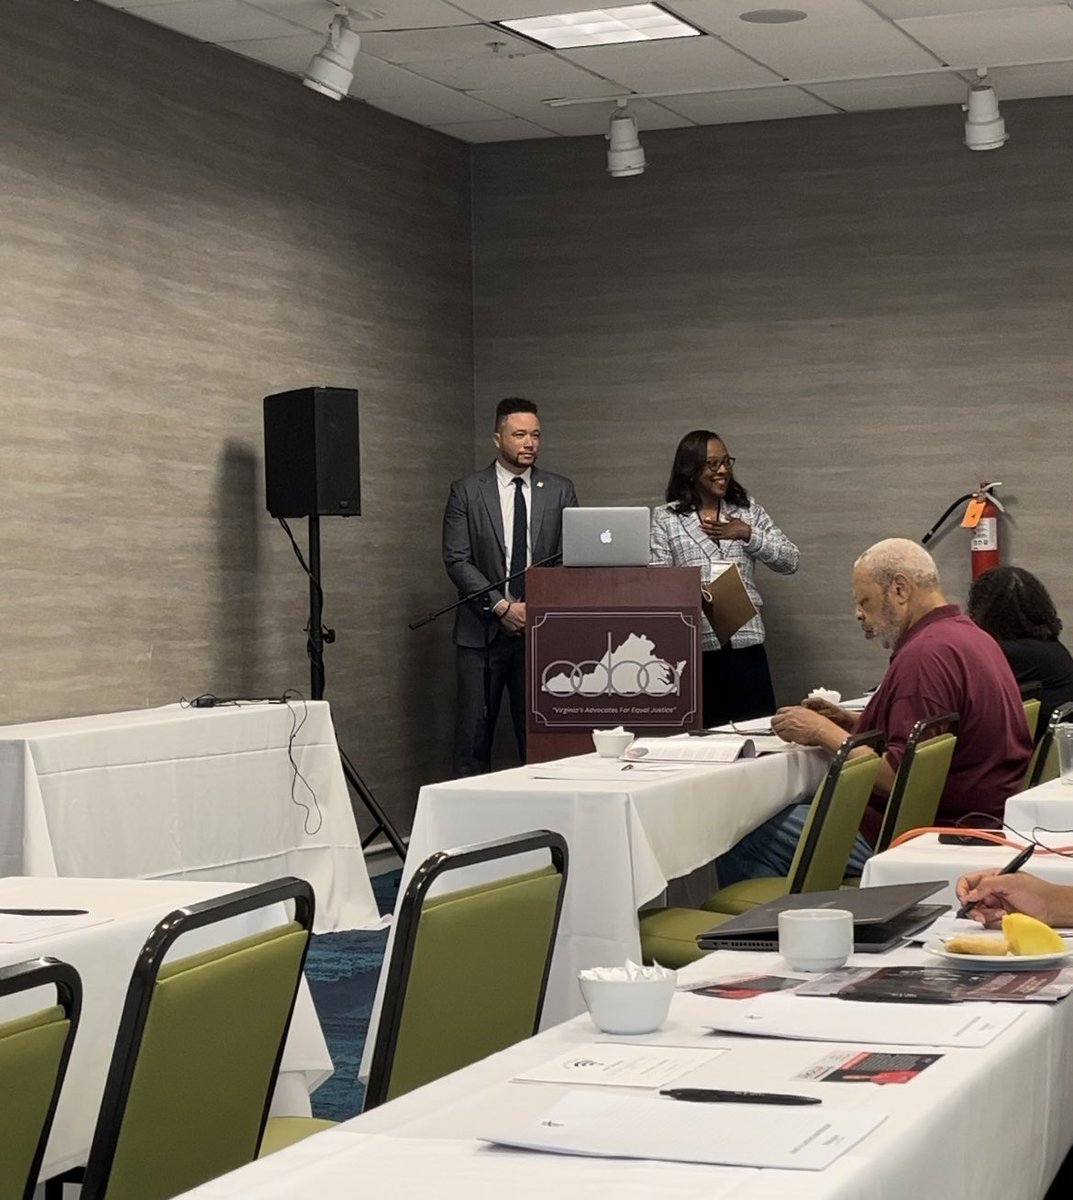 It was great to speak alongside @MikeFeggans this morning at the Old Dominion Bar Association’s Annual Meeting. We got to share insights from the General Assembly and join in meaningful discussion with legal professionals.